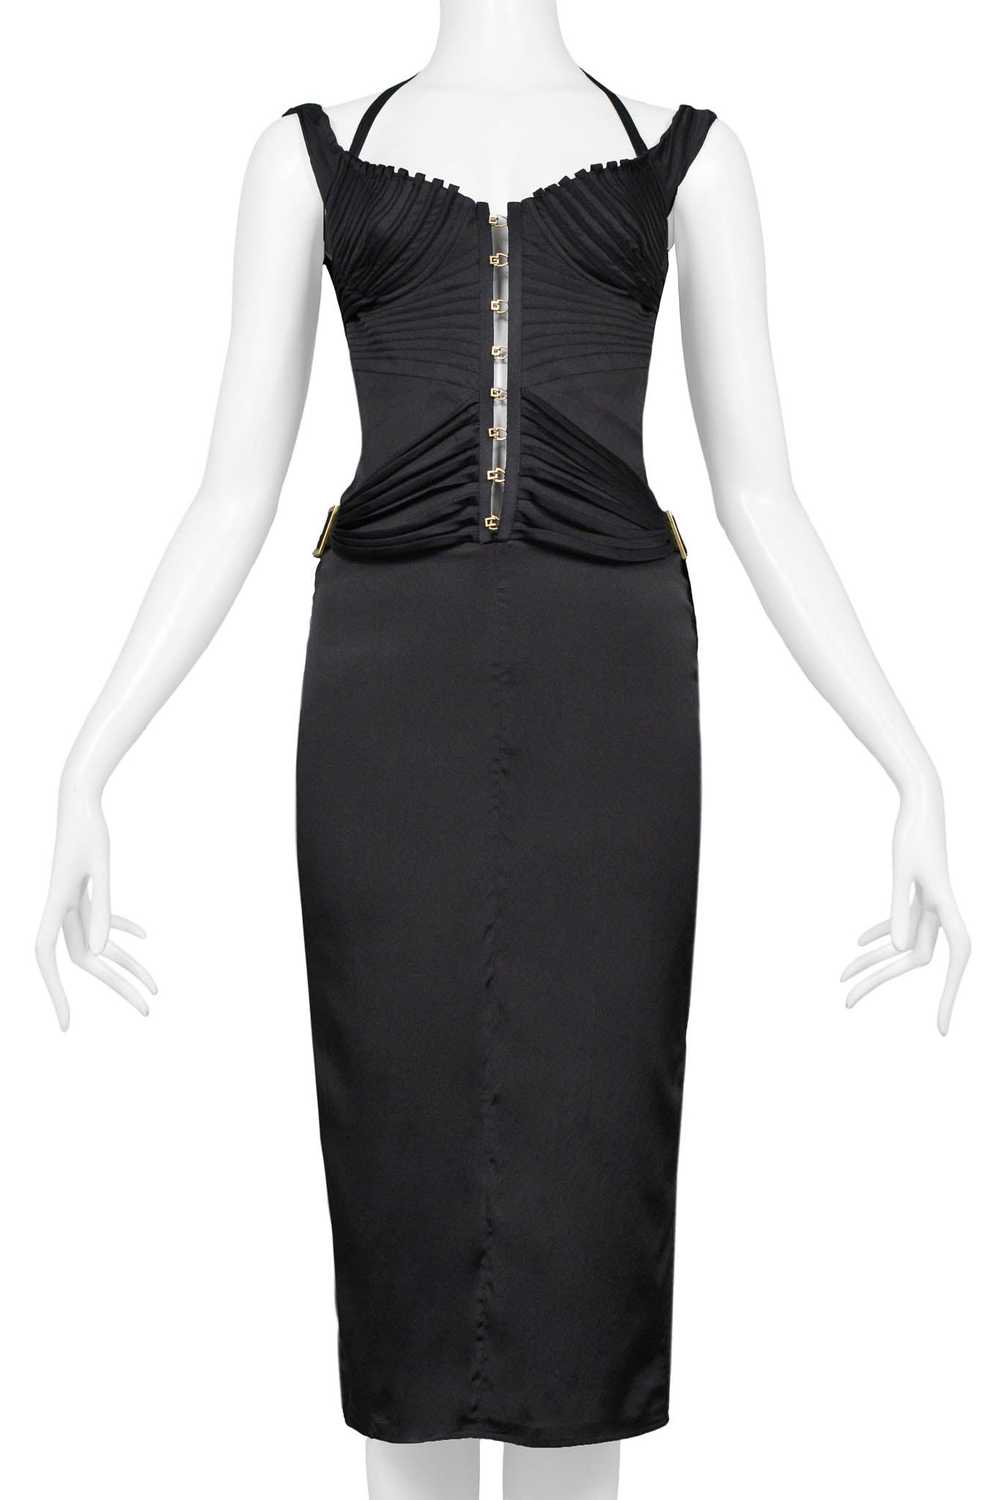 GUCCI BY TOM FORD BLACK CORSET COCKTAIL DRESS 2003 - image 5